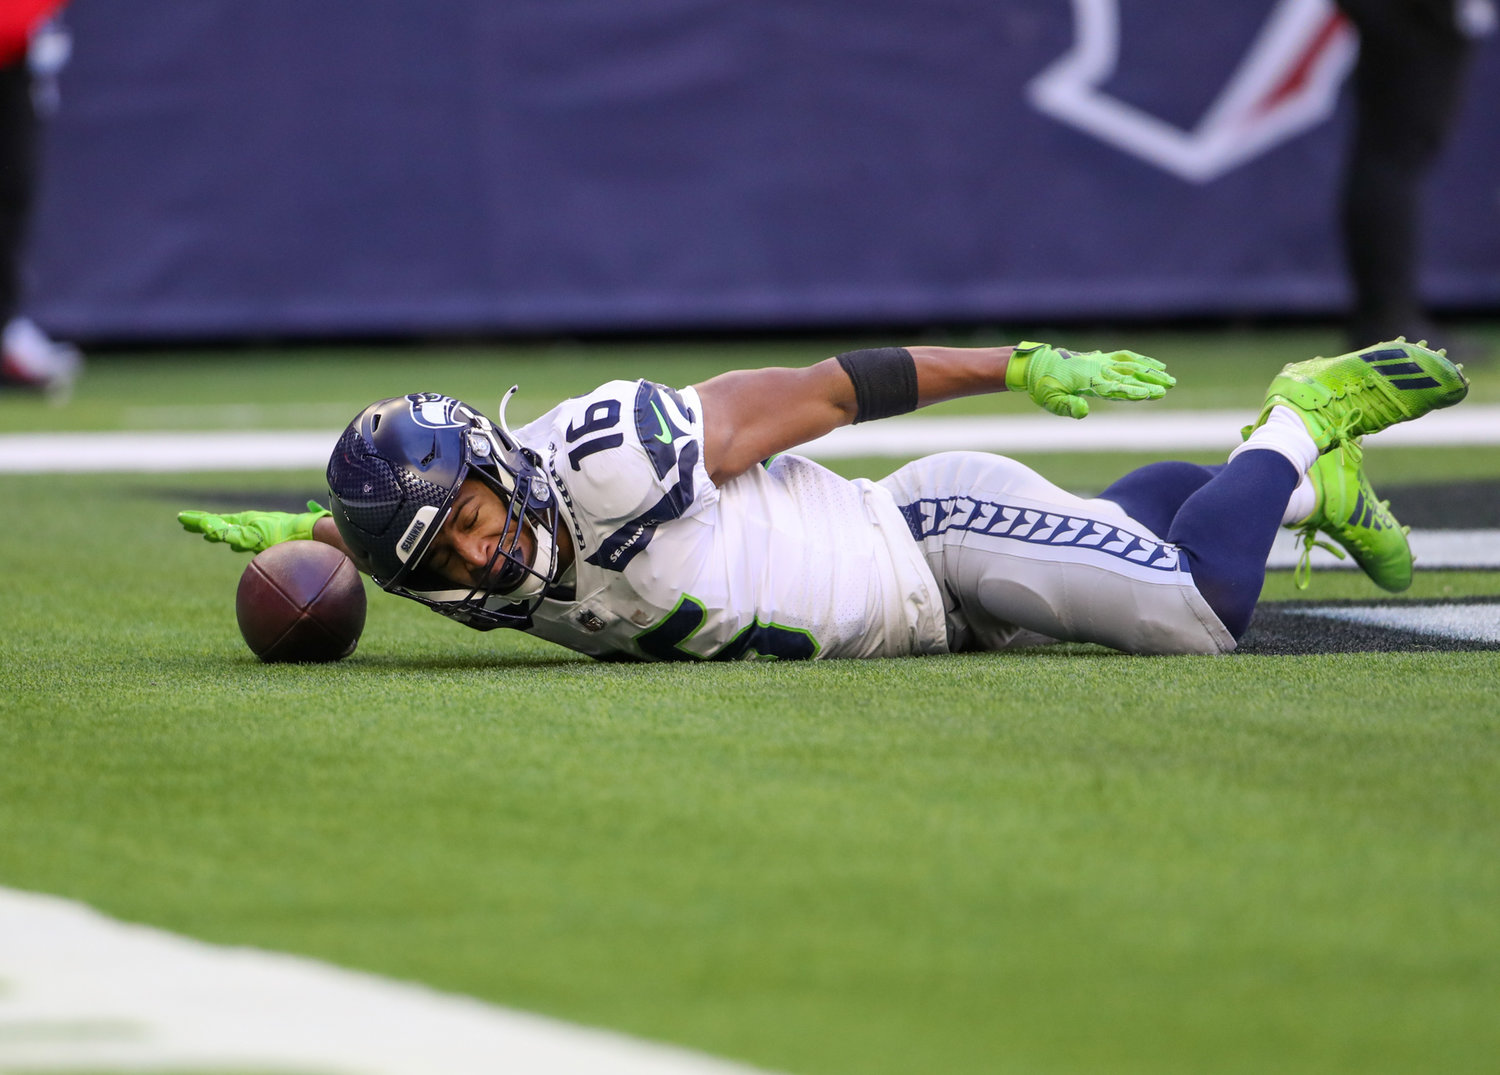 Seattle Seahawks wide receiver Tyler Lockett (16) celebrates after a touchdown catch during the first half of an NFL game between the Seahawks and the Texans on December 12, 2021 in Houston, Texas.